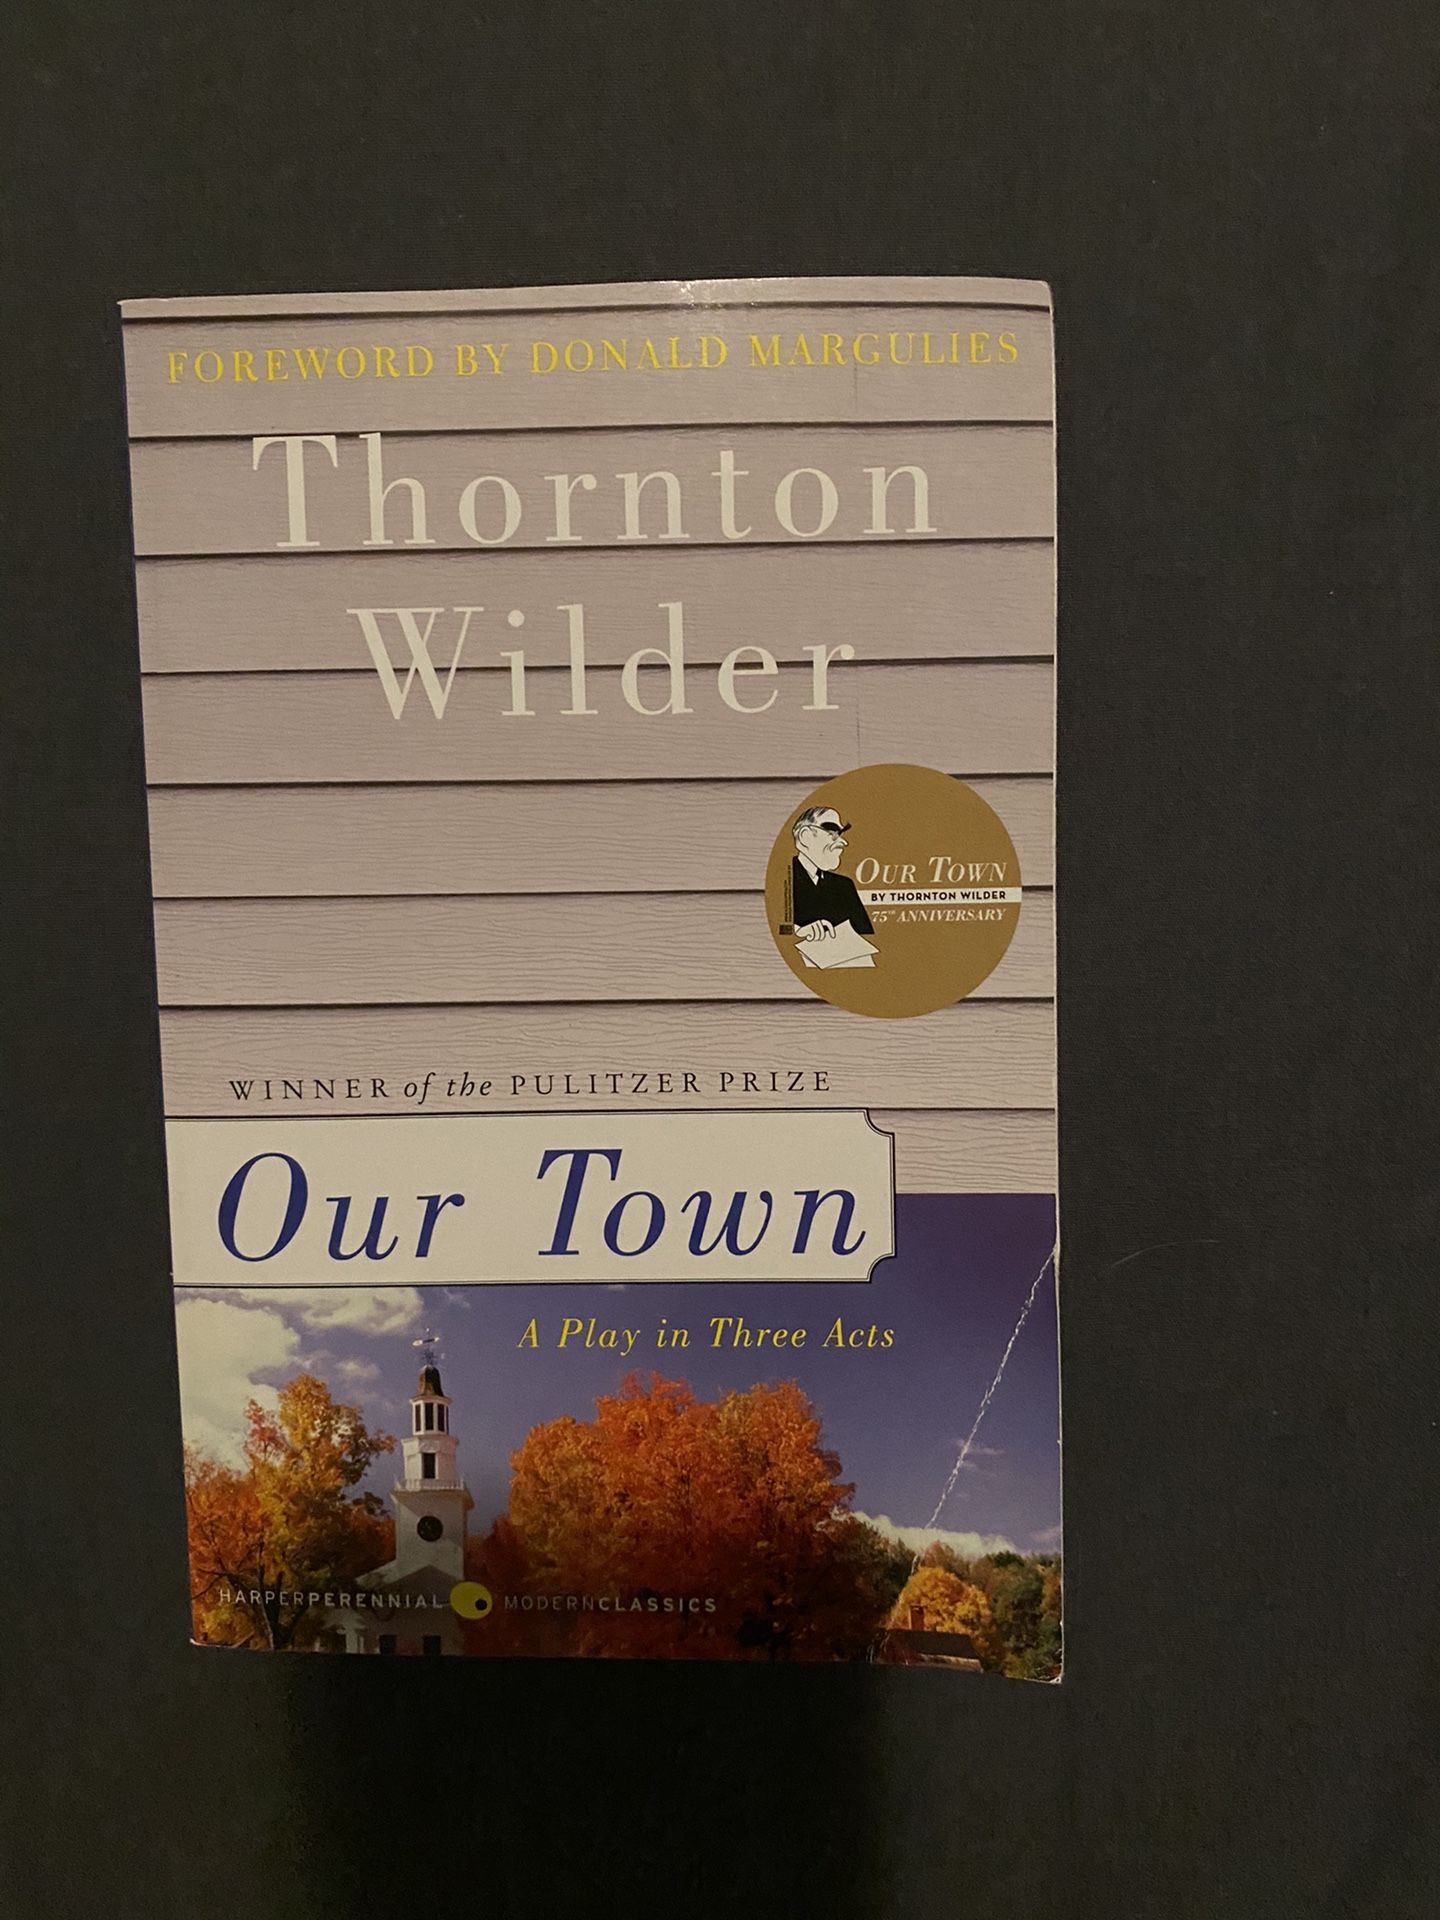 Book “Our town” by Thornton Wilder